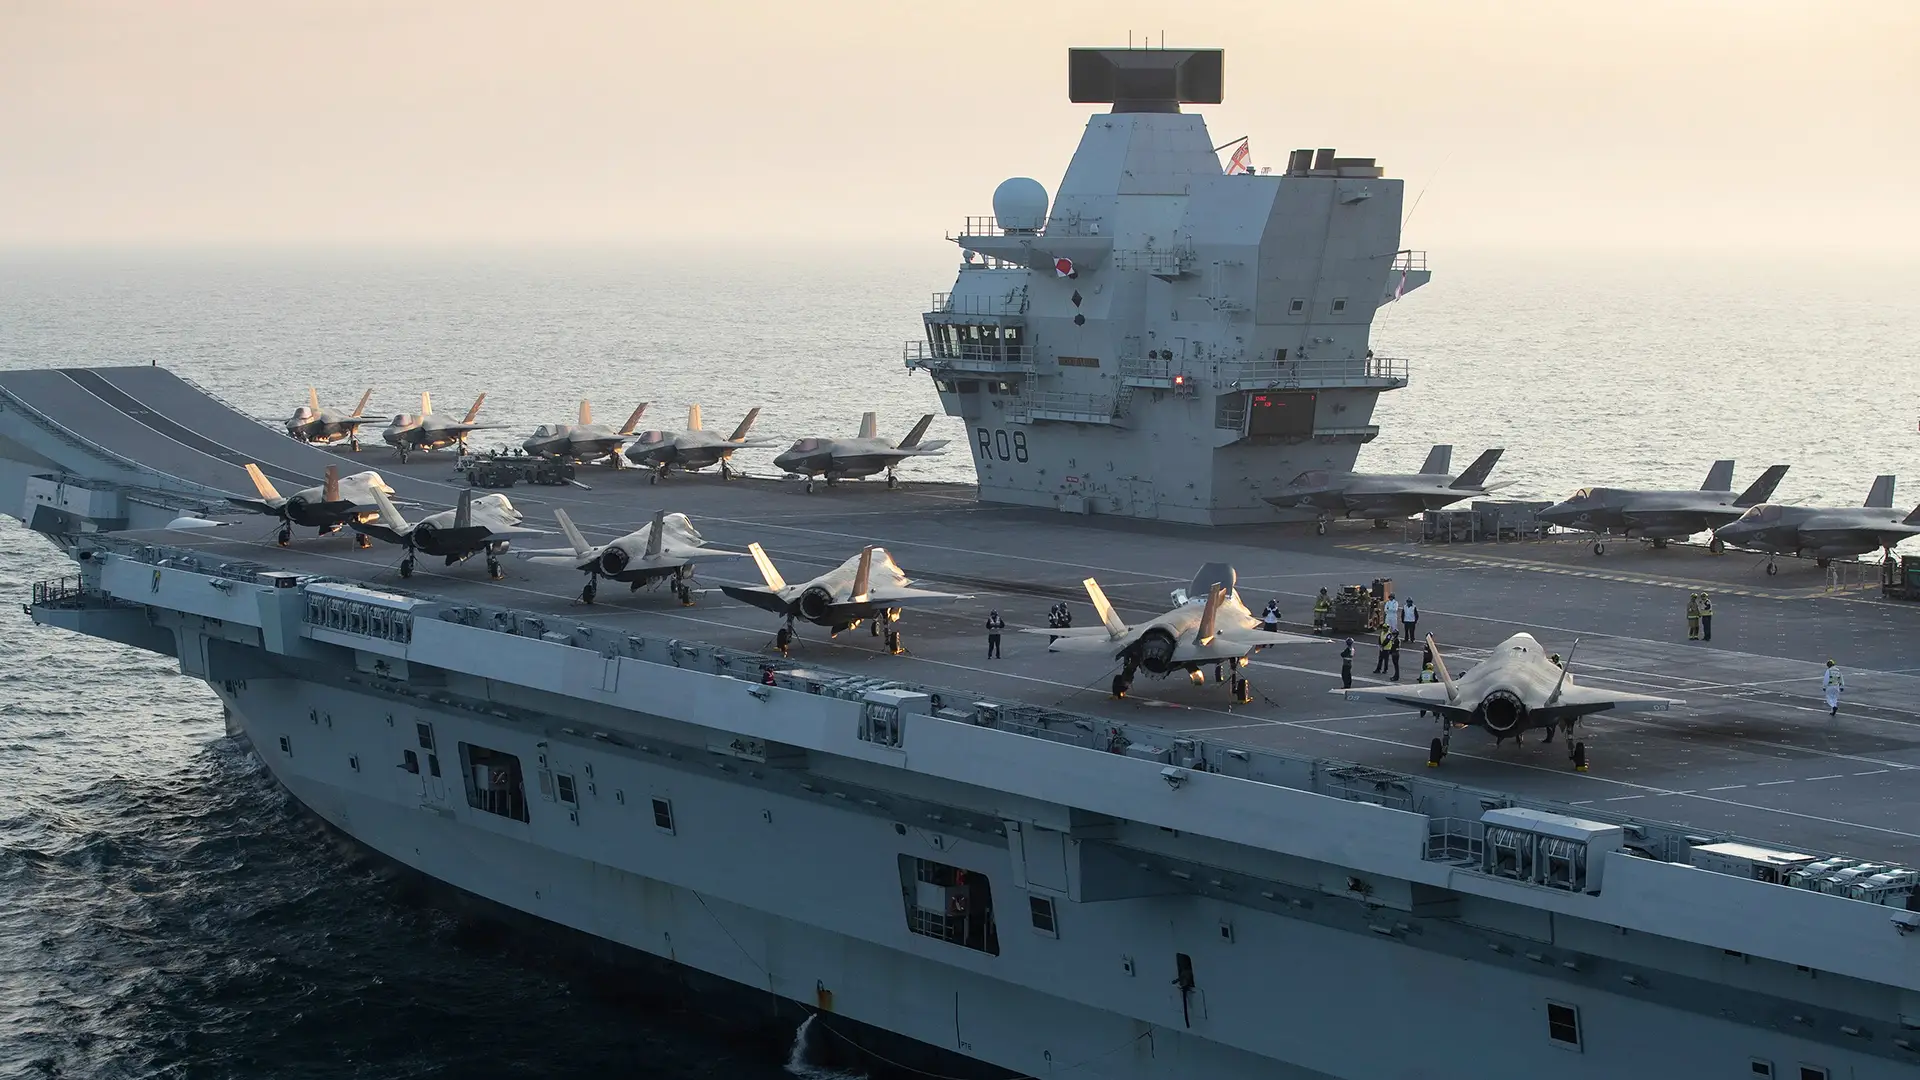 The Royal Navy wants to equip the Queen Elizabeth aircraft carrier with catapults and drone air finishers